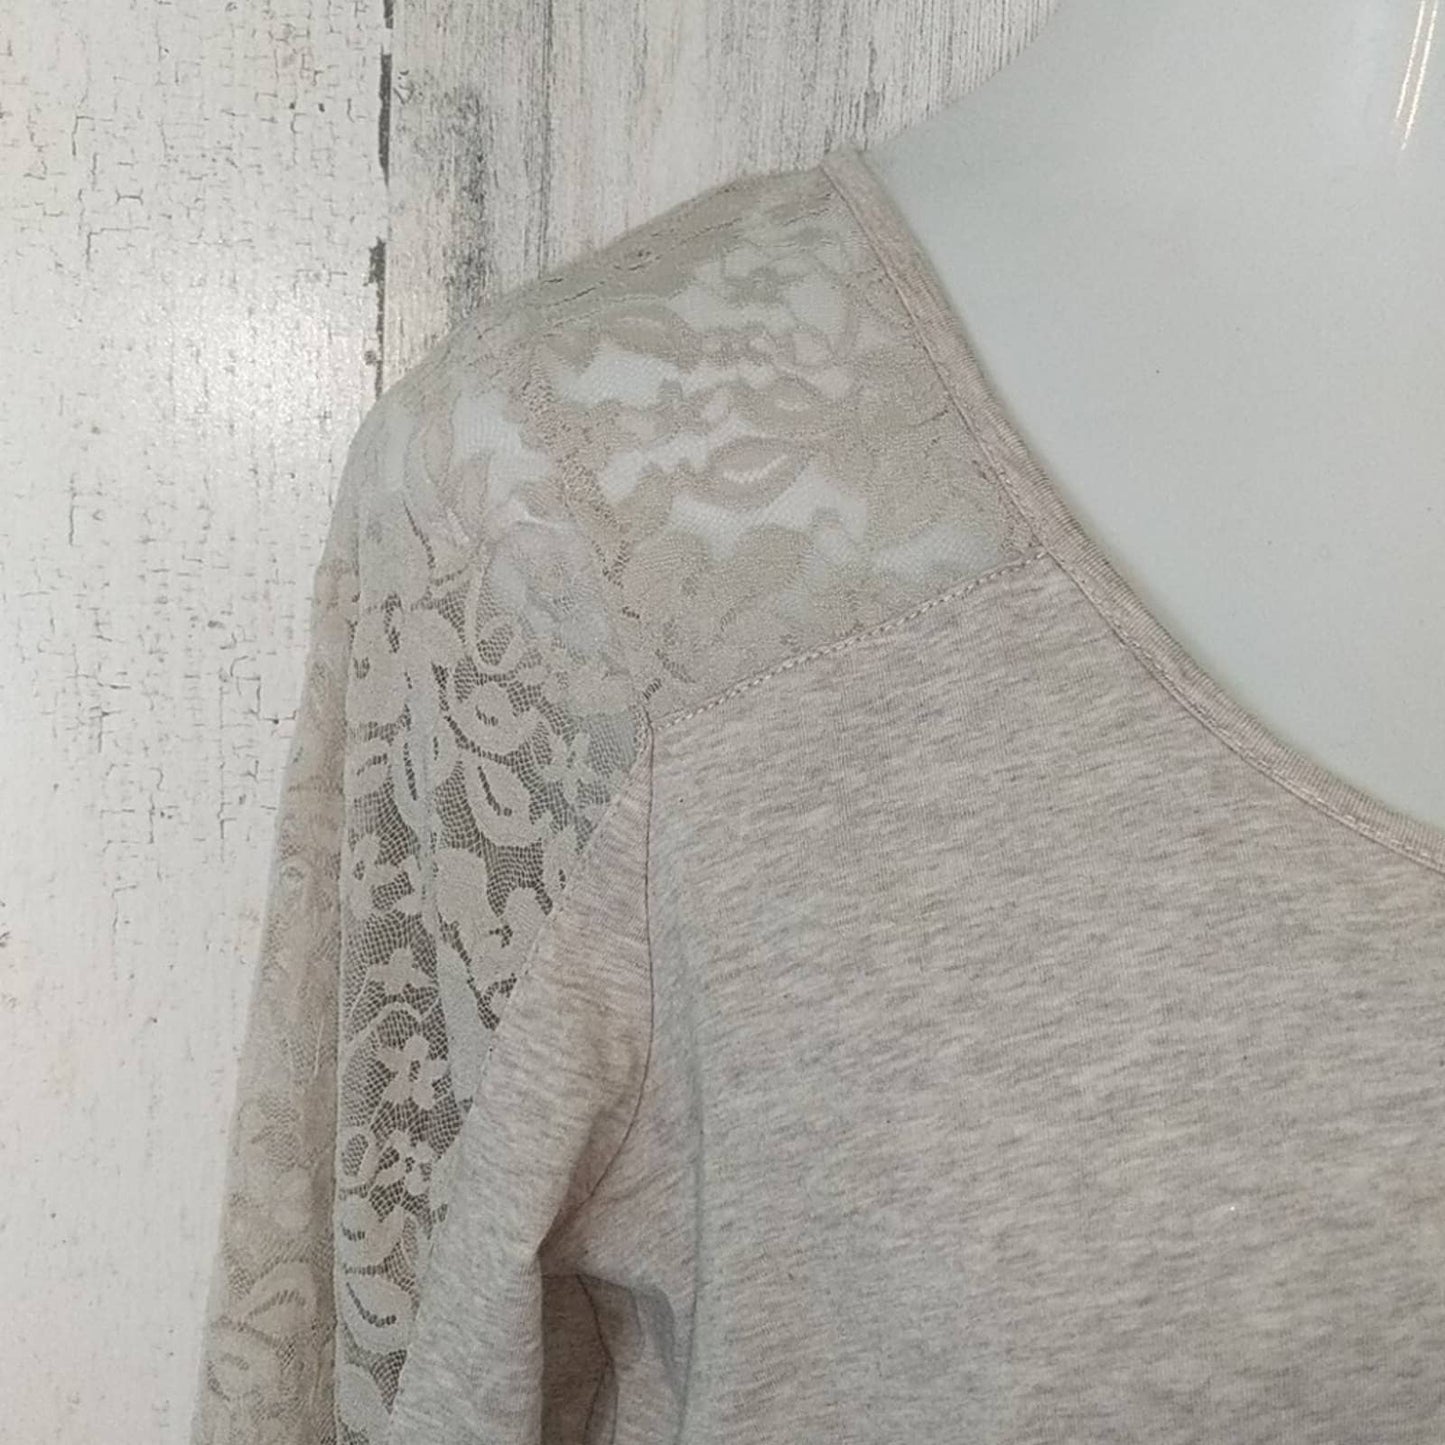 AMBIANCE Tan Heathered Top Lace Shoulders 2X NEW